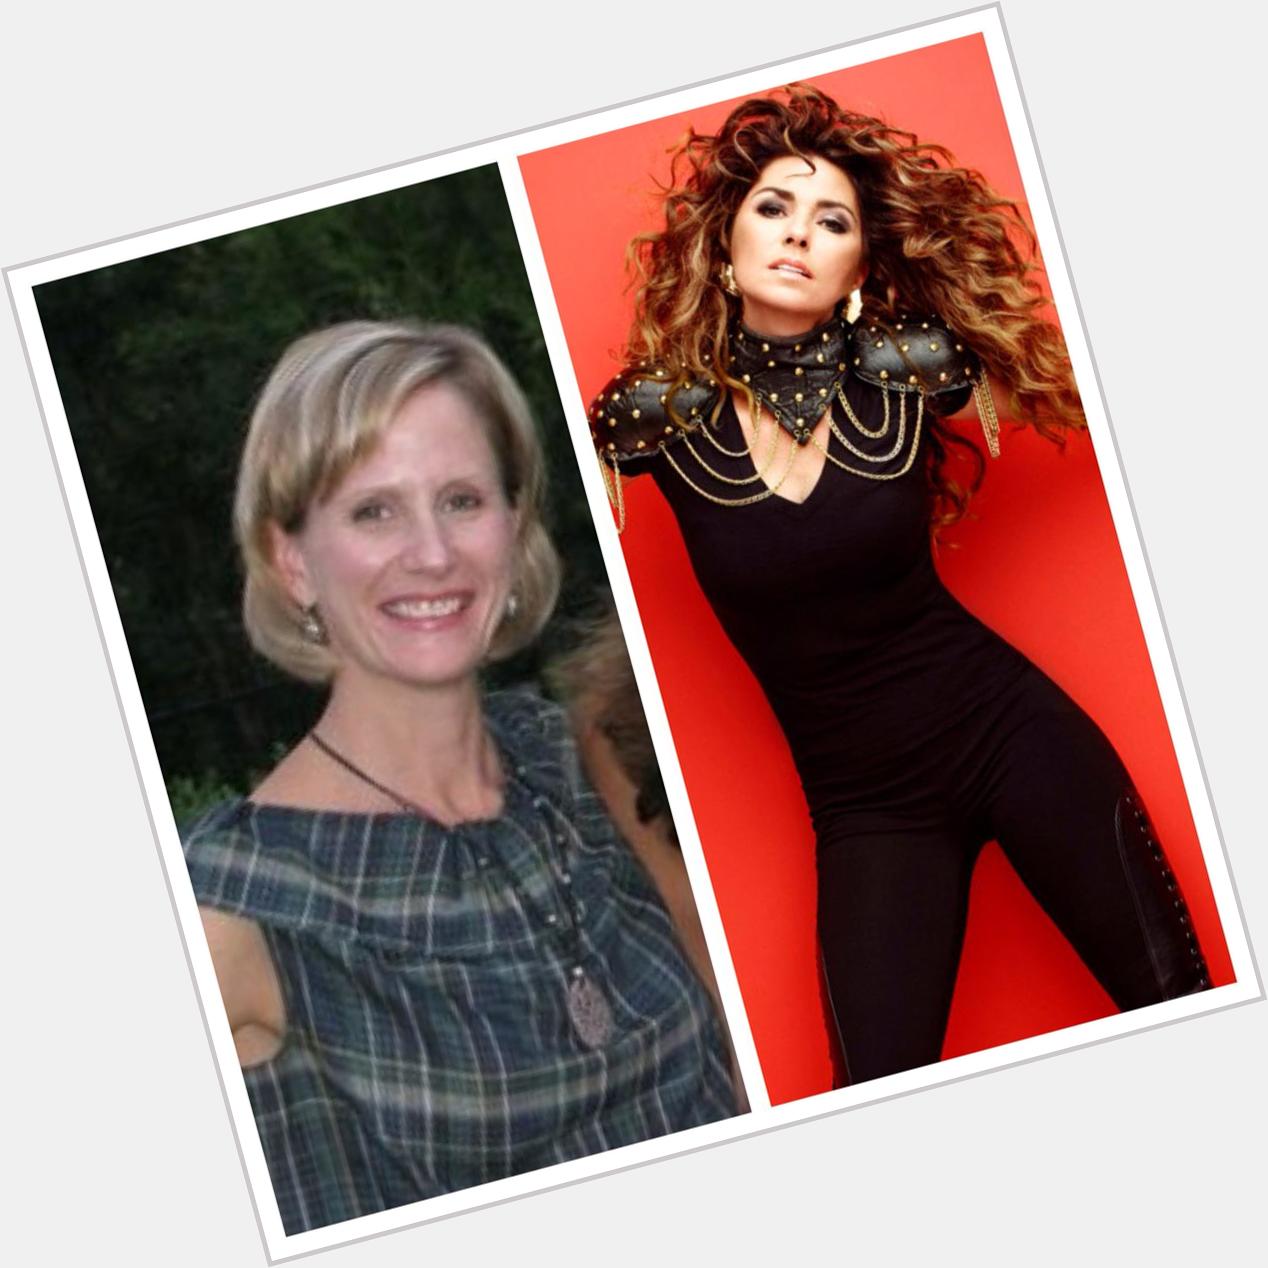 Happy 50th birthday to my mom and Shania Twain!!! Thank you both for slaying me hard over the past 19 years!!!! 